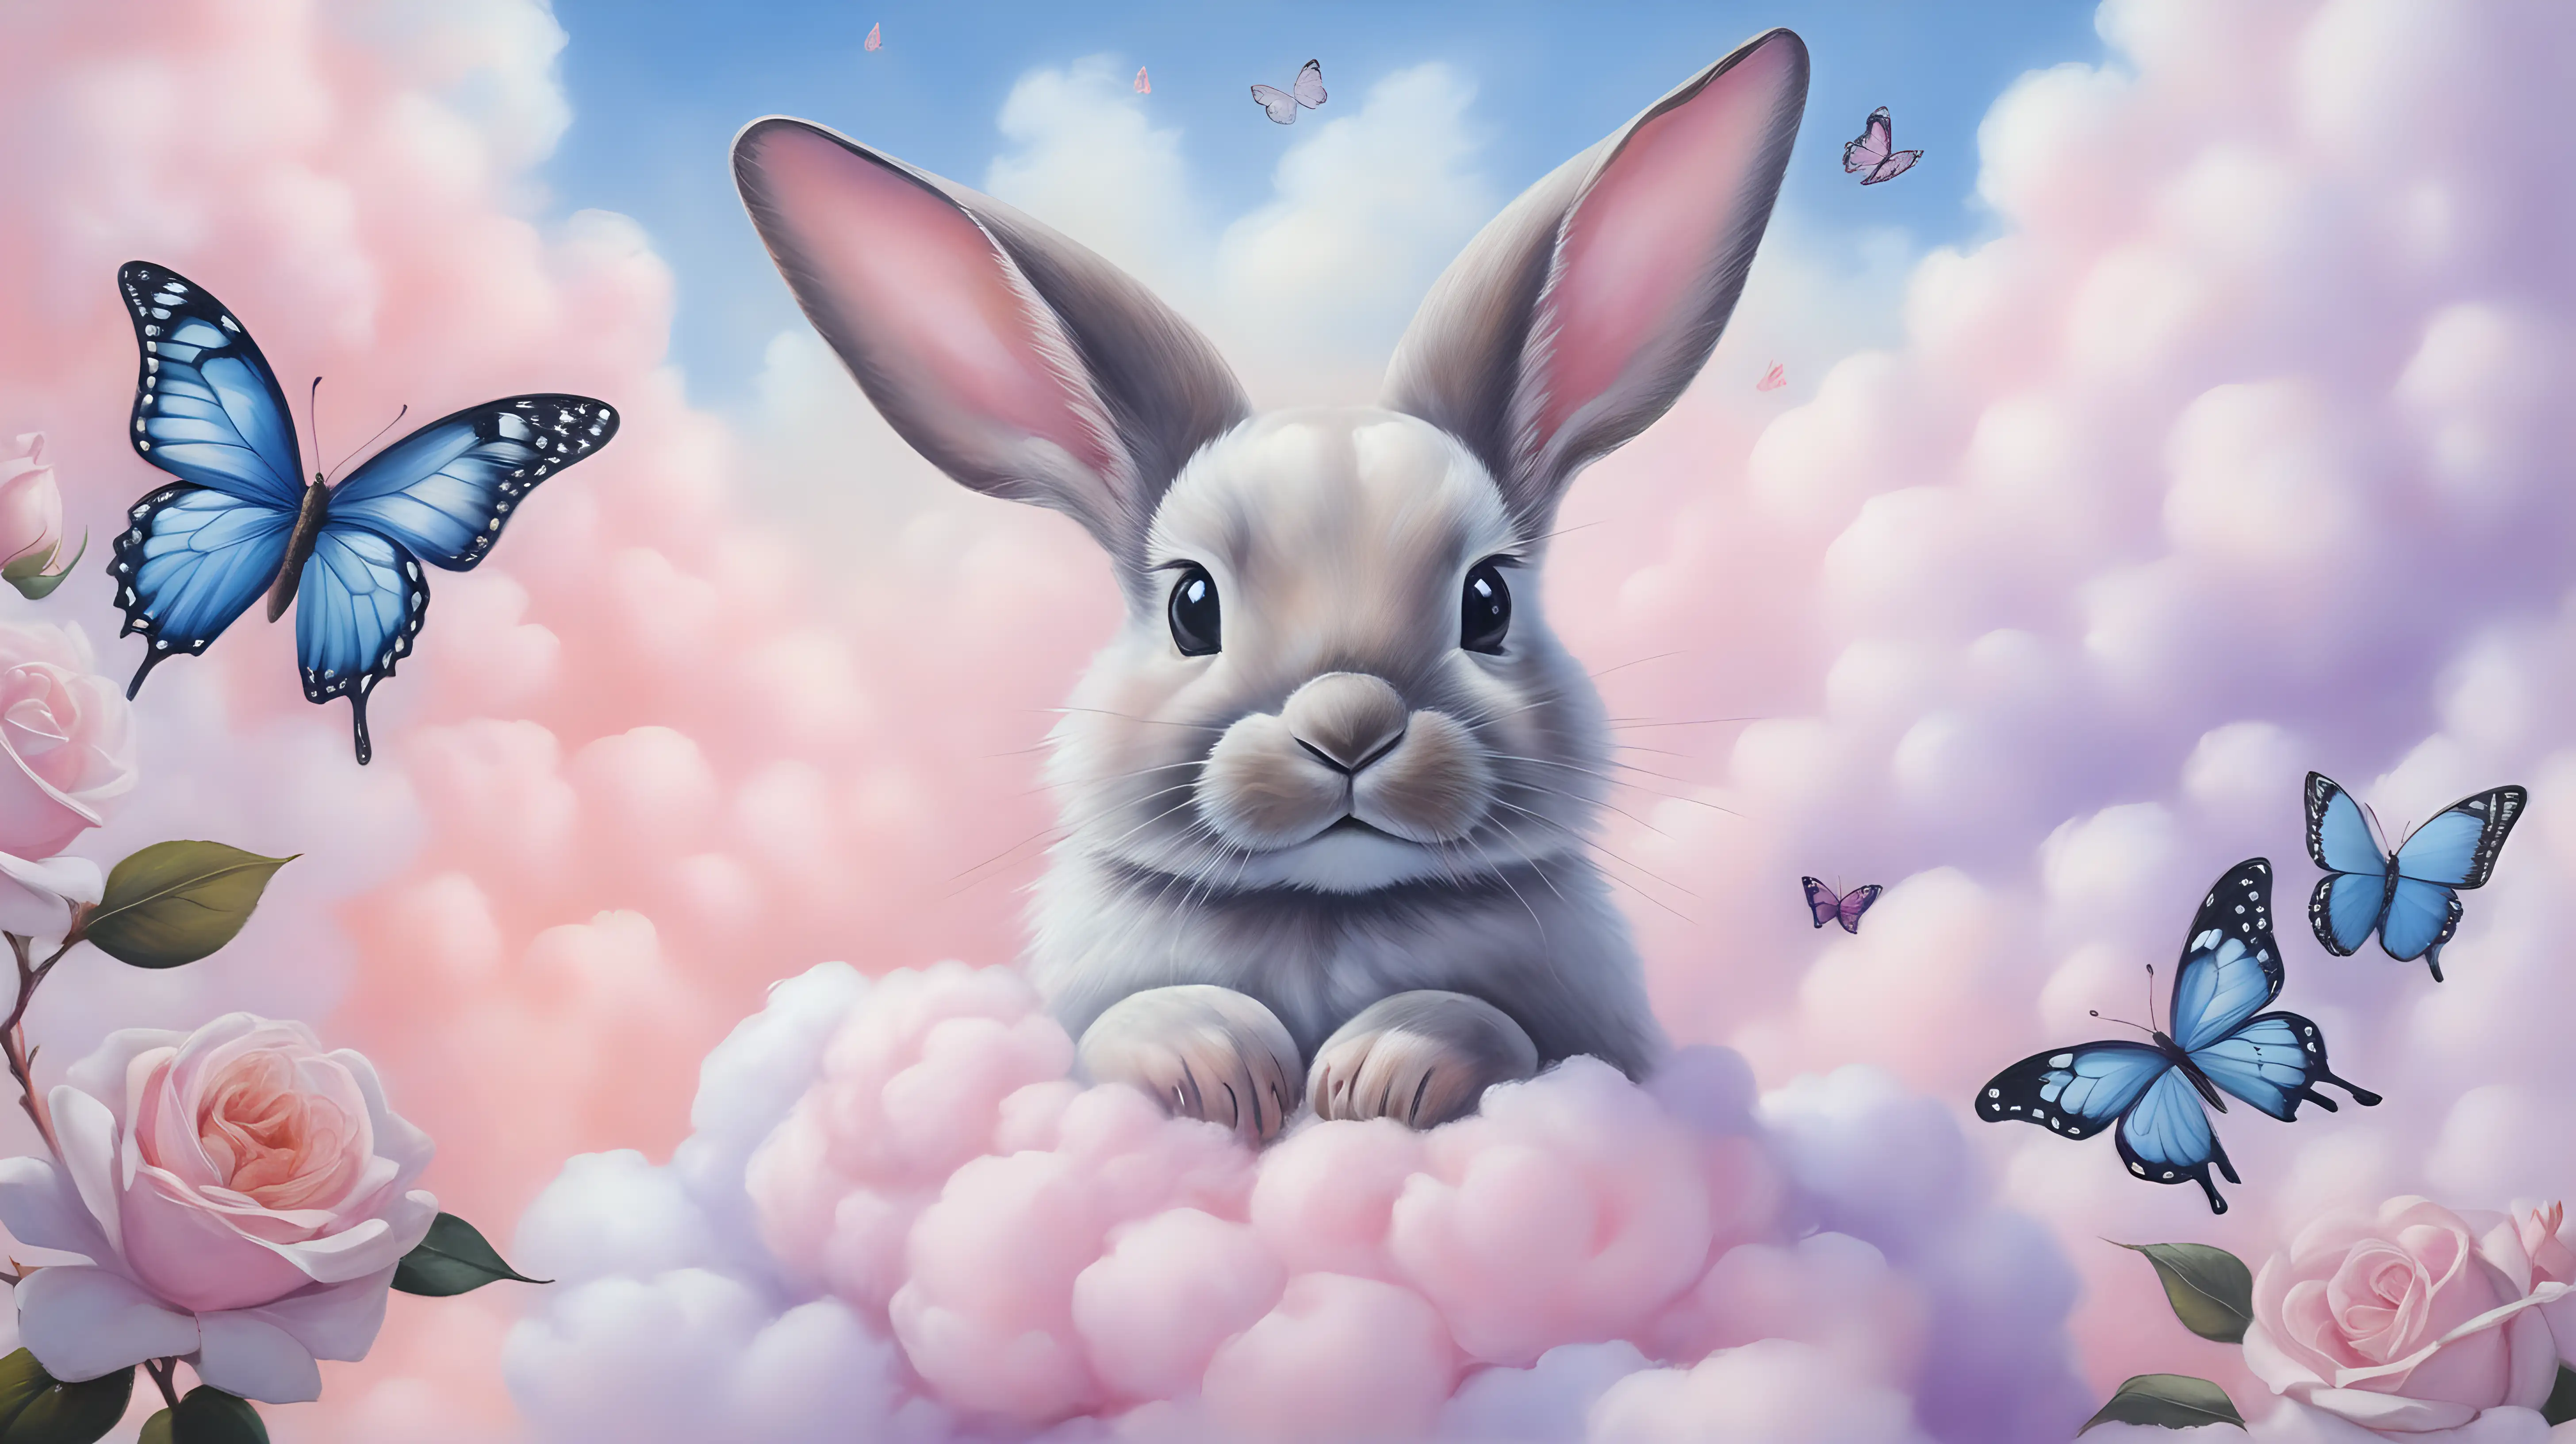 oil painting of a cute rabbit and butterfly (#3F00FF) and a rose cupcake. Surrounded by pastel pink and purple cotton candy flowers and white cotton candy clouds. #F8C8DC